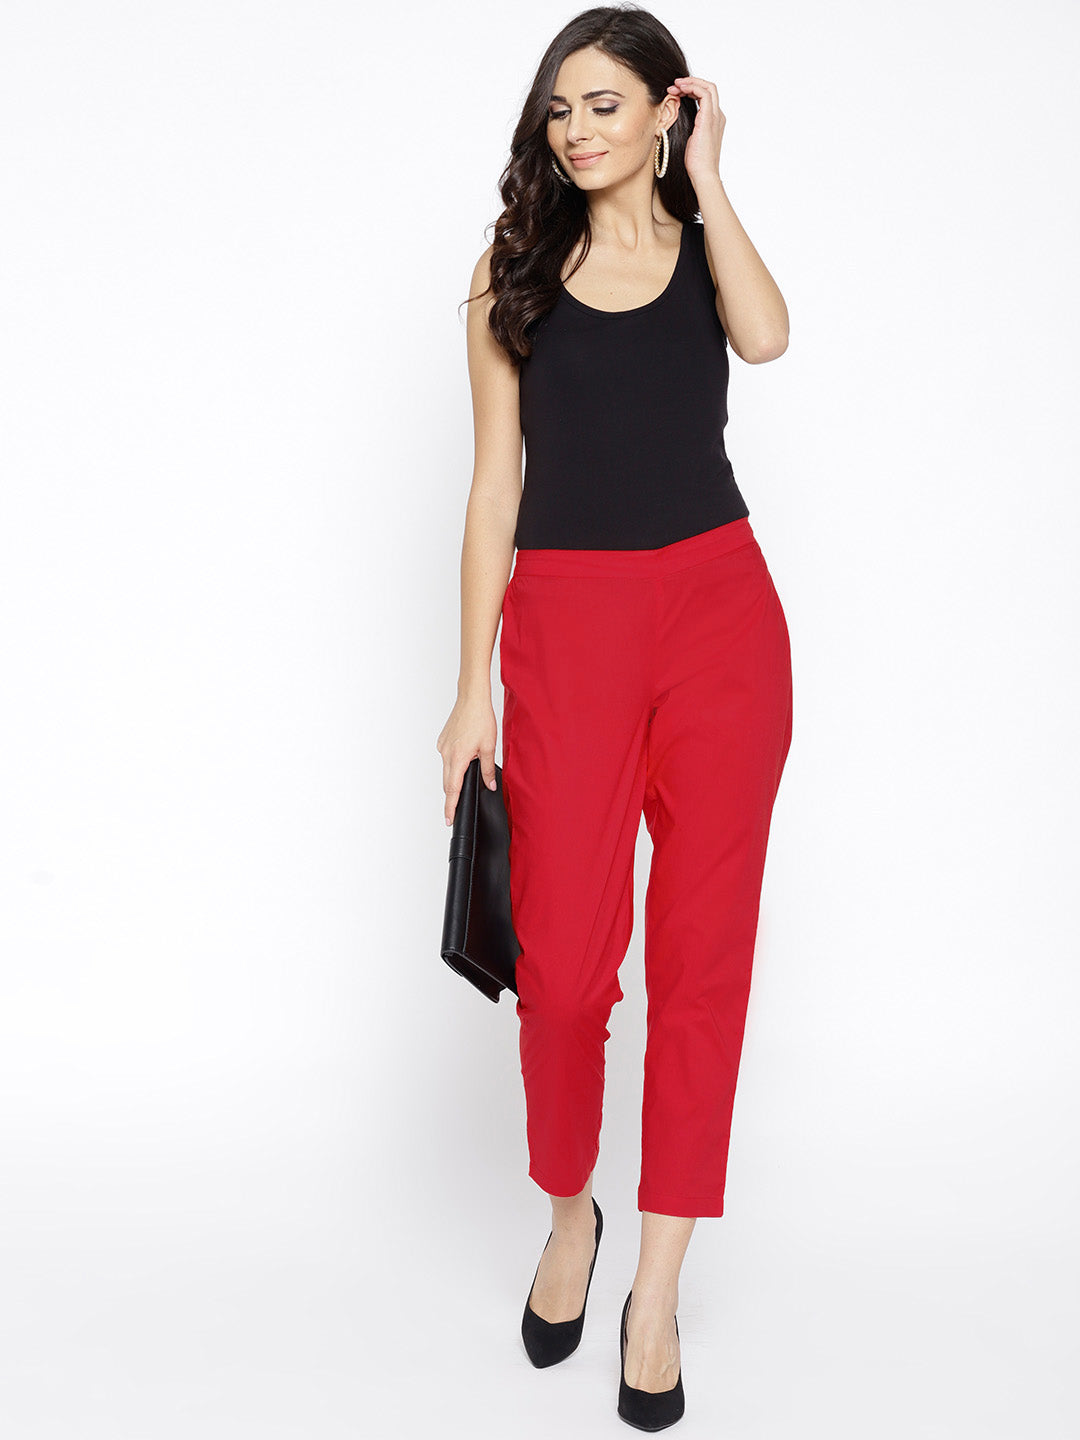 Uniqlo Philippines - Look sharp. Feel comfortable. They look like chic wool  pants.* But when you put them on, you'll immediately have a different  impression. These pants stretch vertically and horizontally with